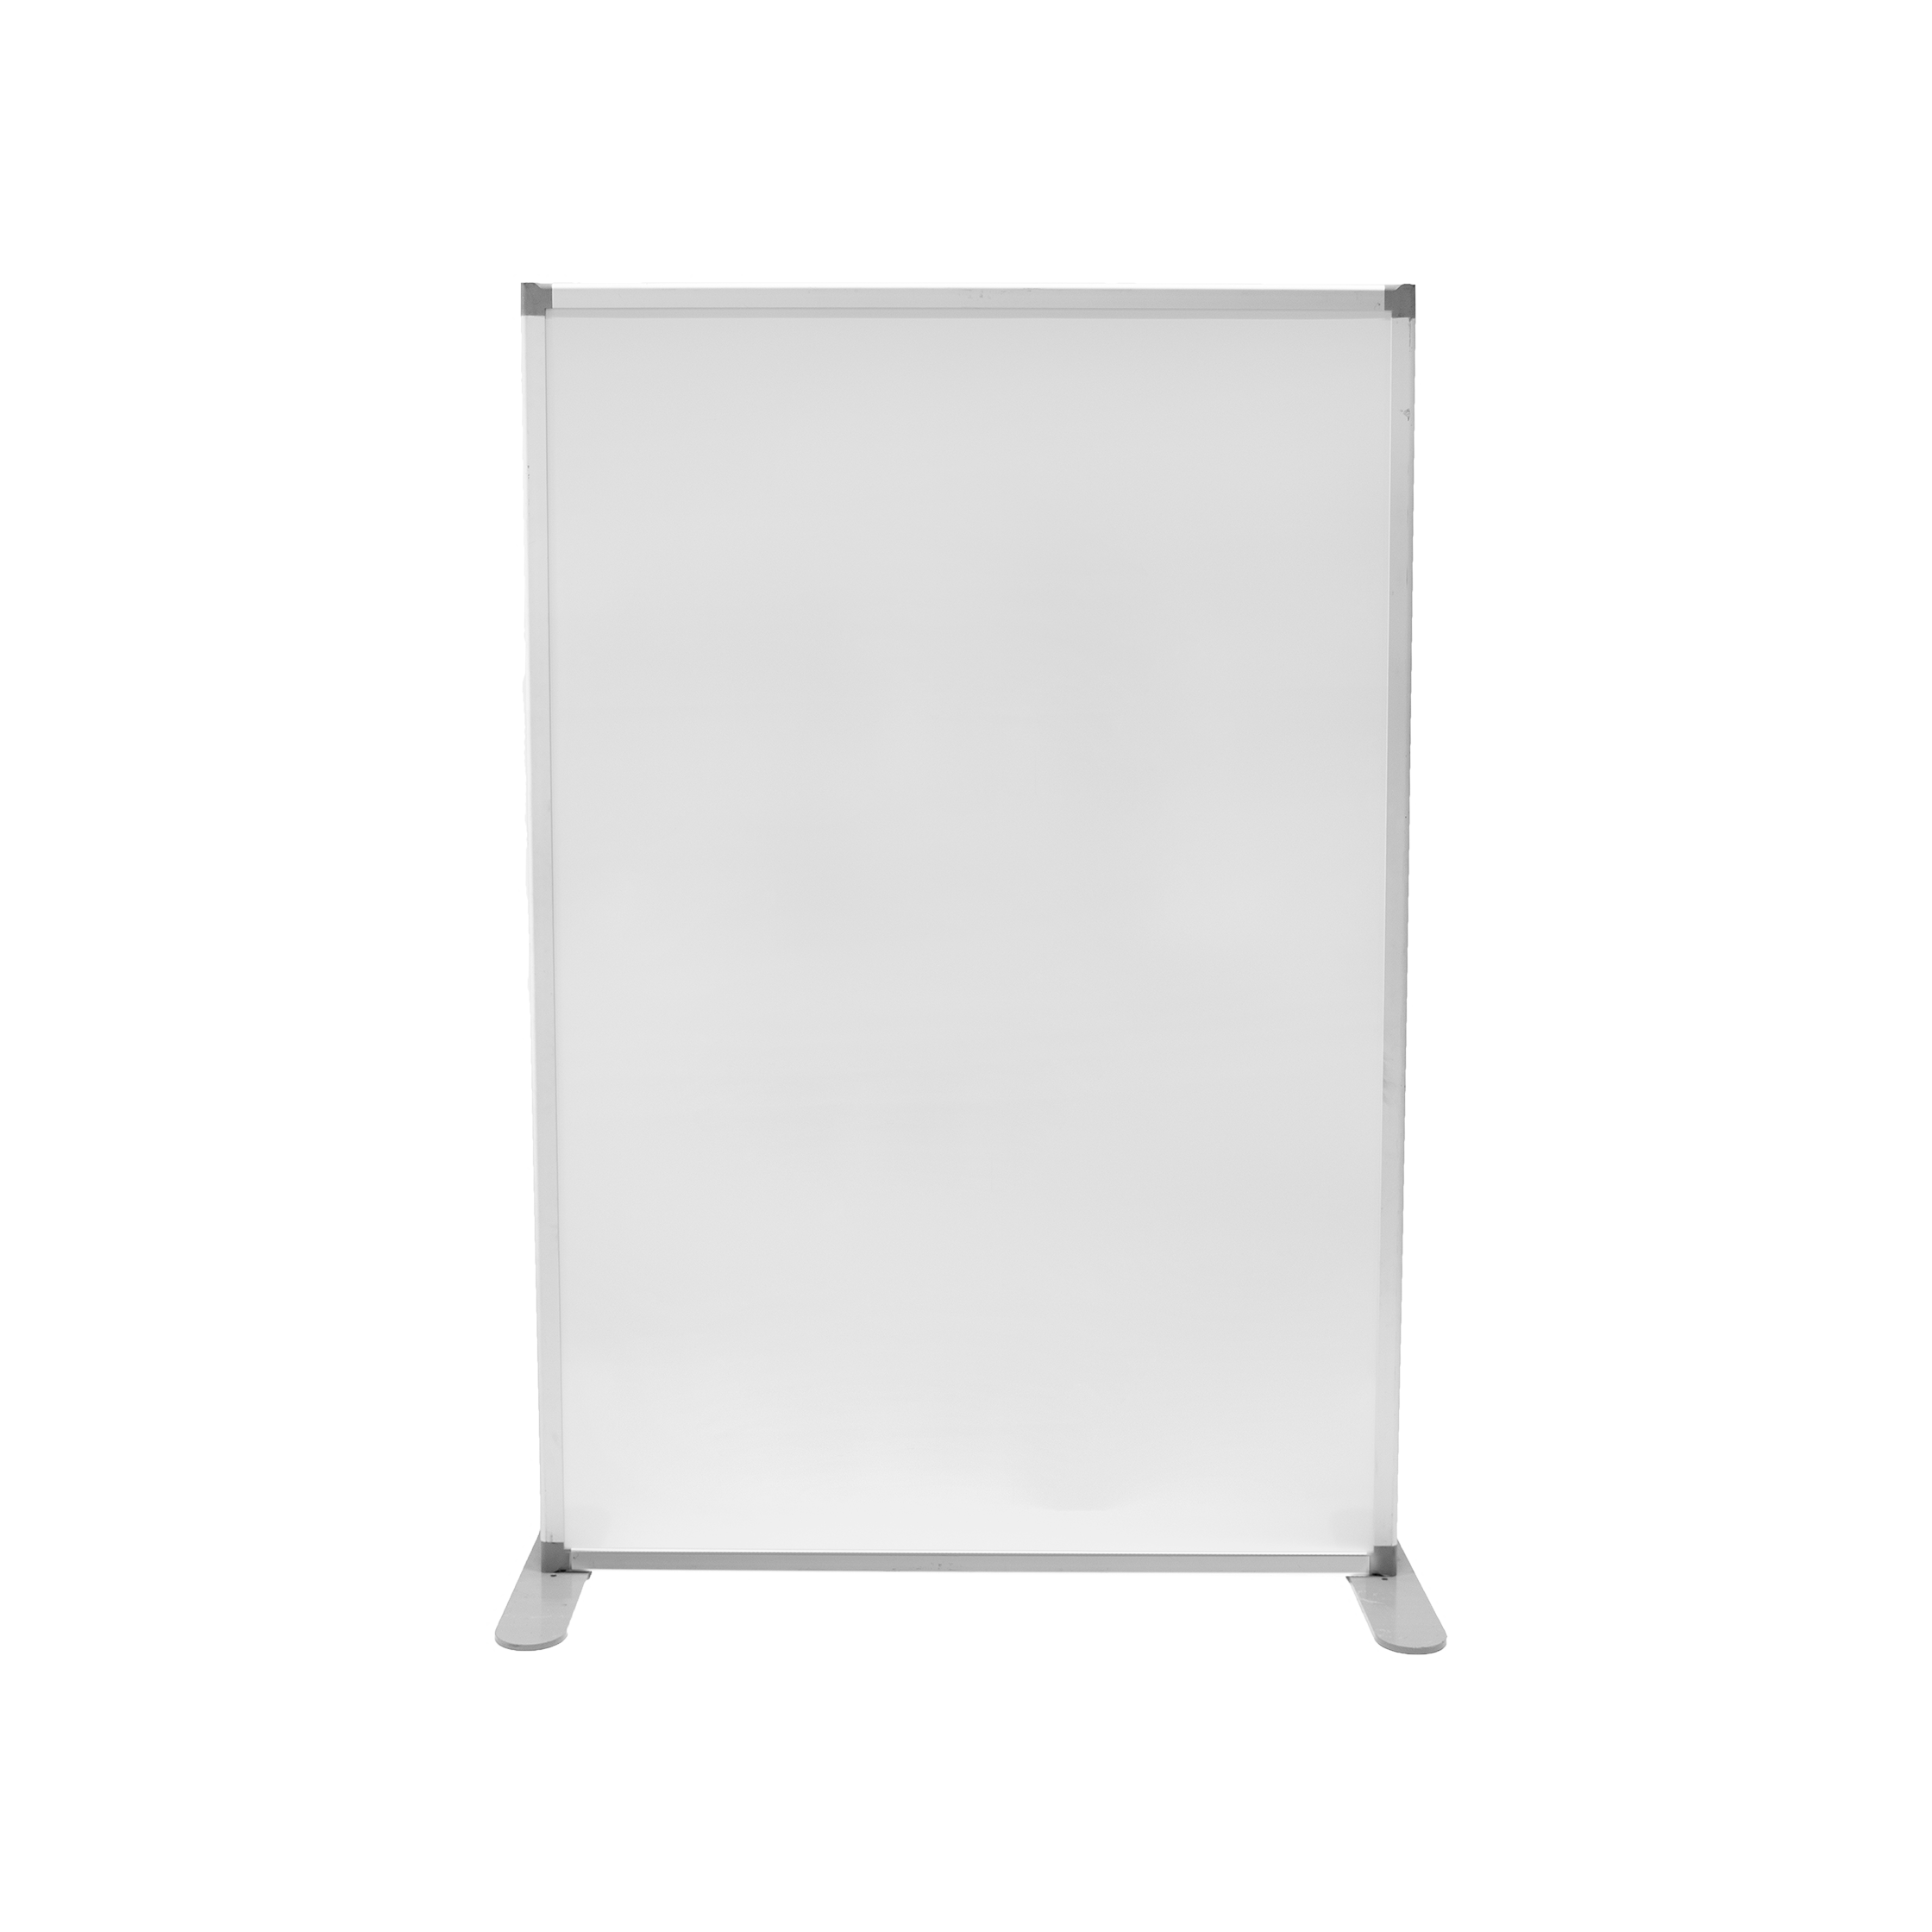 Whiteboard / partition wall